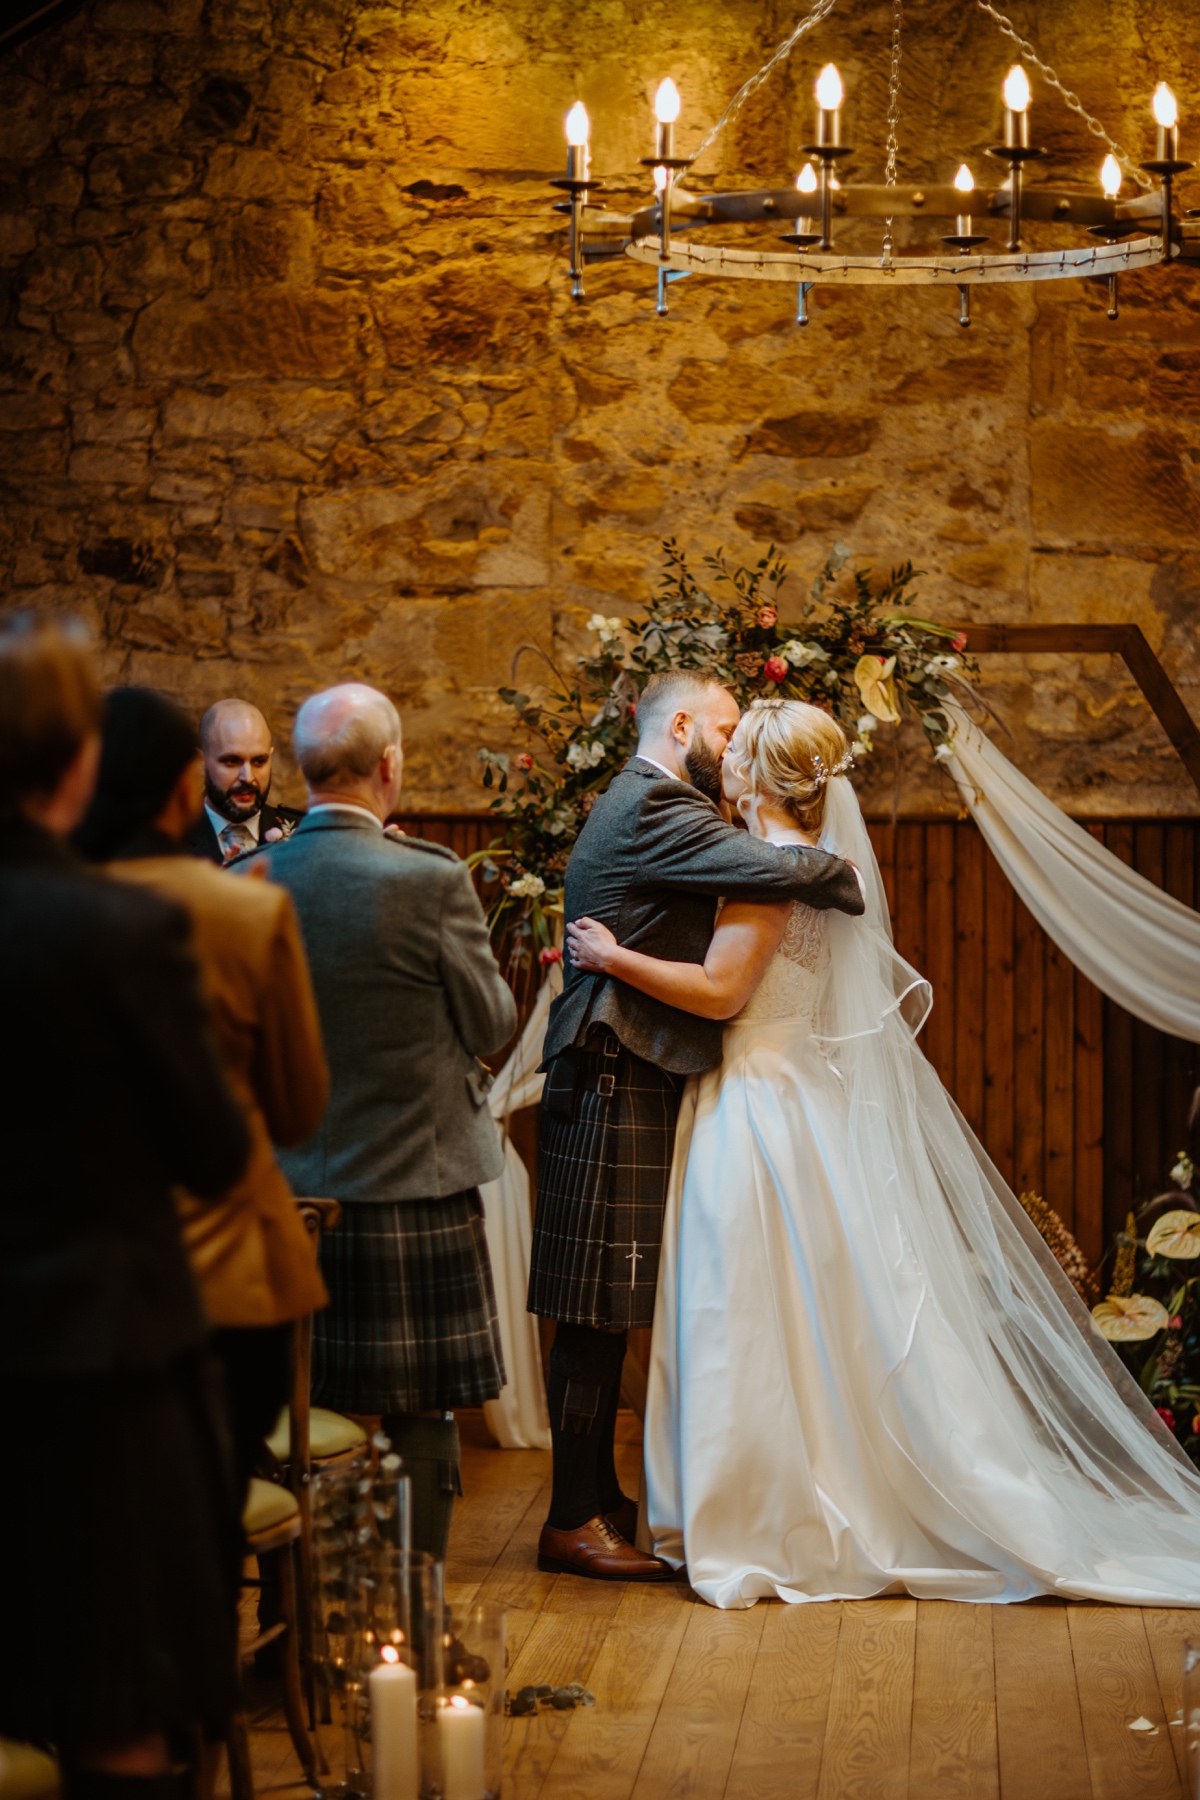 first kiss of bride wearing white lace dress and groom wearing full kilt outfit as guests look on scottish humanist wedding